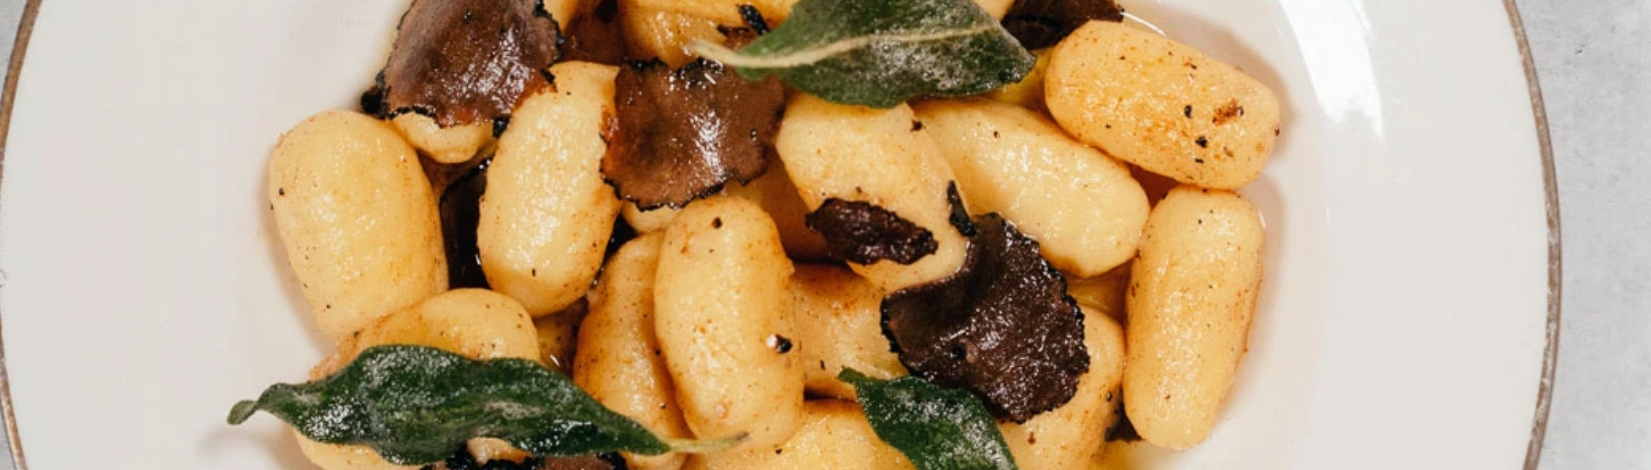 Image of Sweet Potato Gnocchi with Truffle Brown Butter